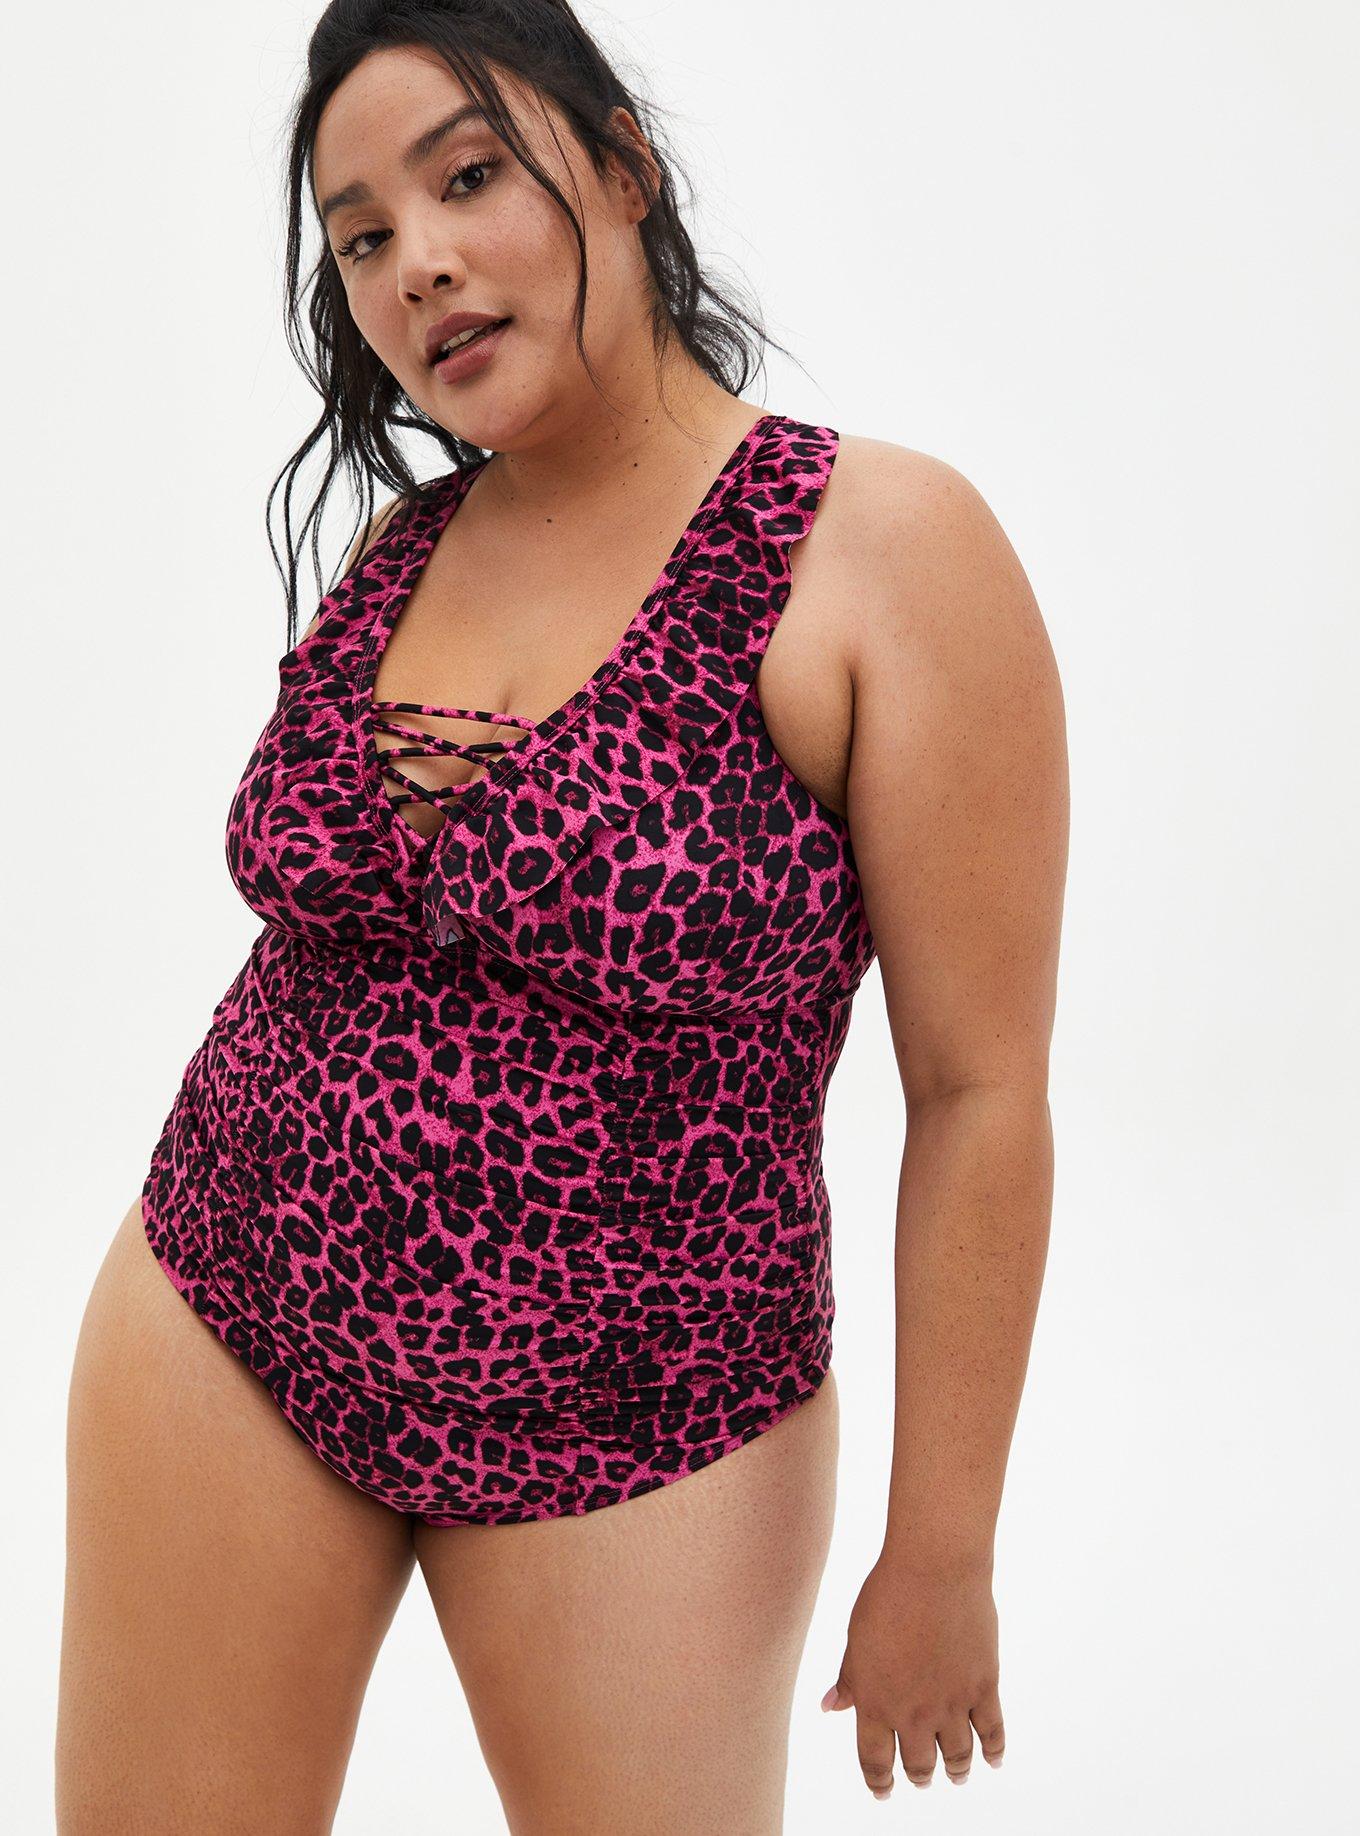 Rqyyd Womens Twist Front High Waisted Bikini Set Sexy Push Up Two Piece Swimsuit Solid Leopard Floral Print Bathing Suit(Hot Pink,S), Women's, Size